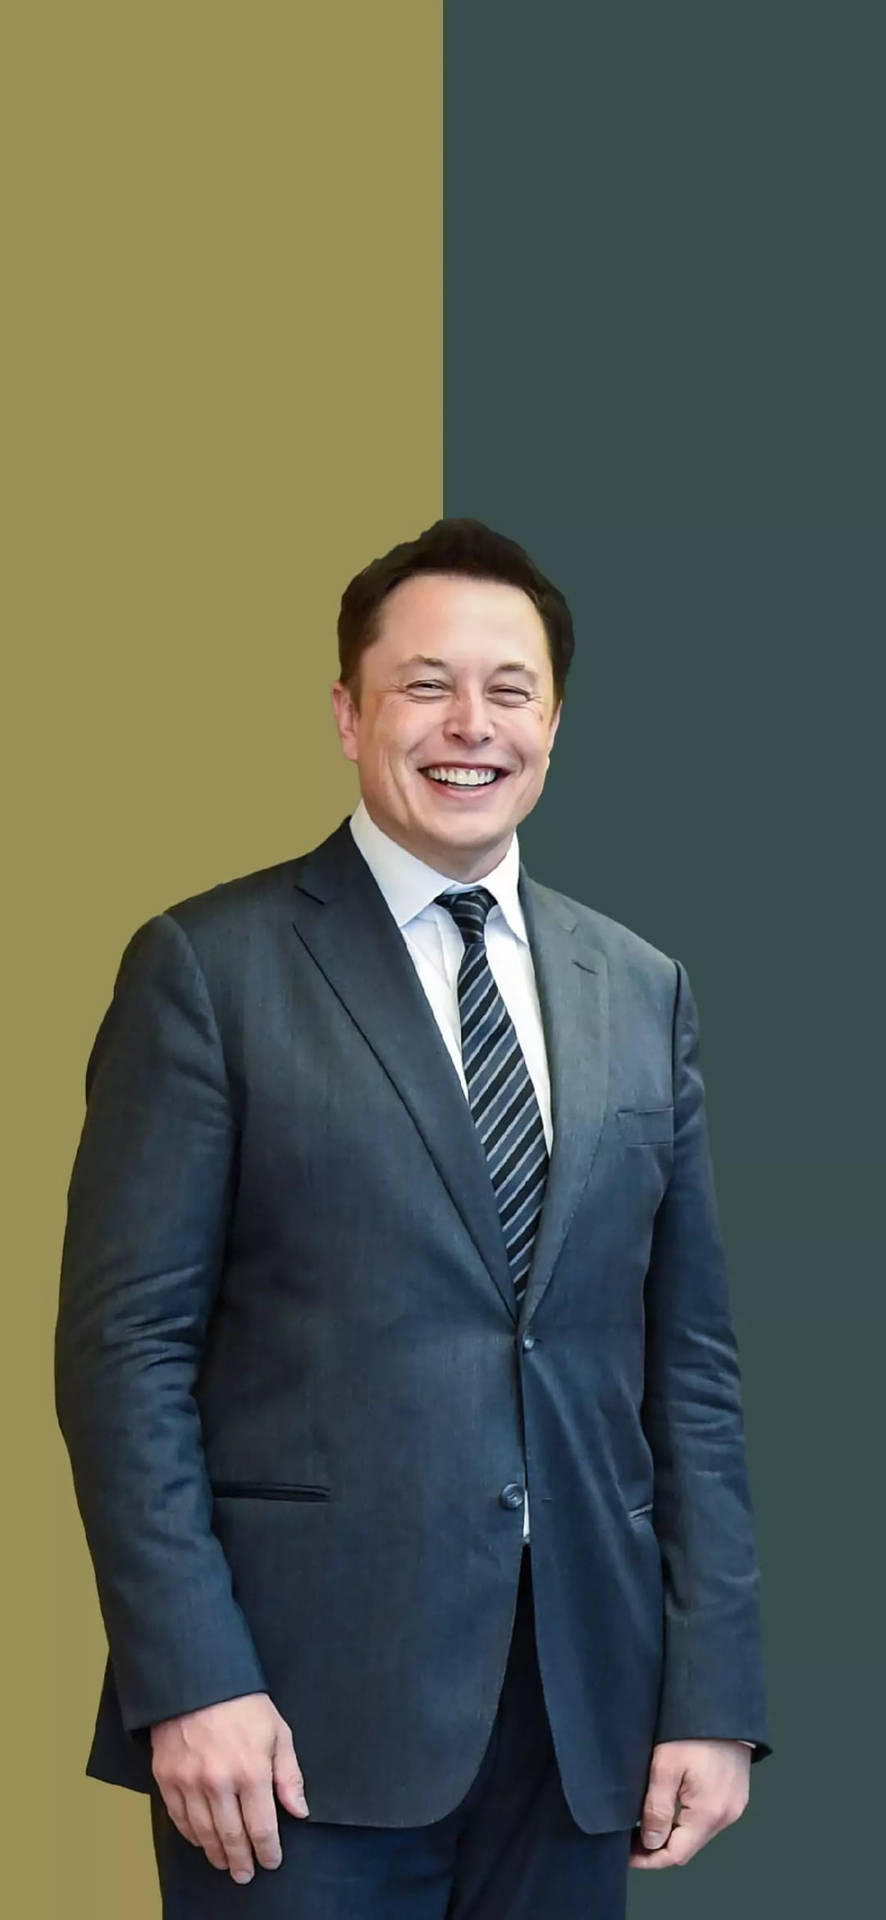 Elon Musk 1080X2340 Wallpaper and Background Image